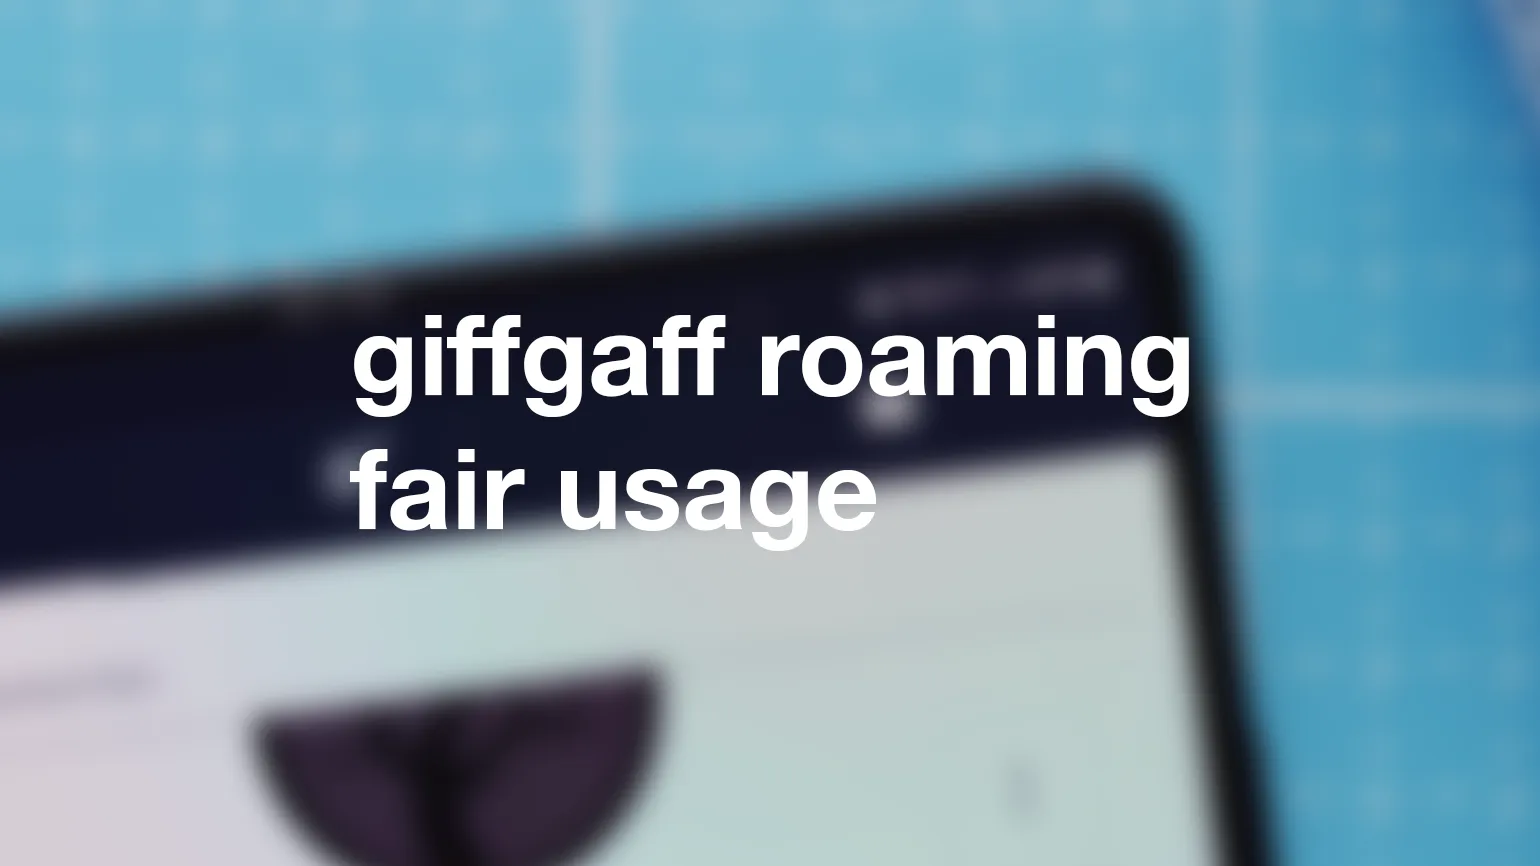 Does giffgaff have a fair usage policy when roaming?